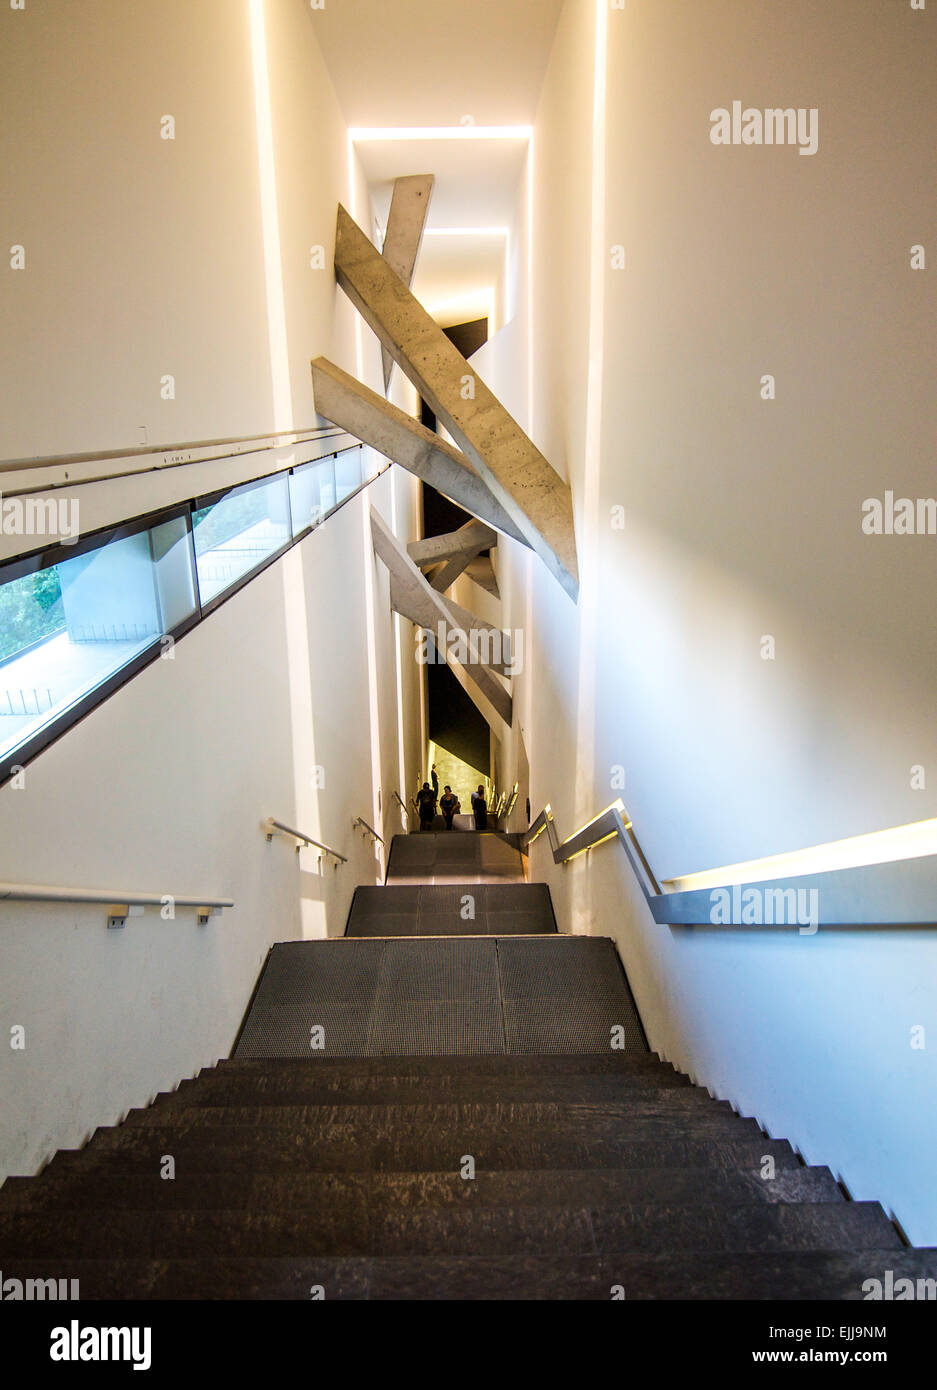 The long and steep central stairway inside the Jewish Museum in Berlin, Germany. Themes of random chaos are implied in the toppl Stock Photo